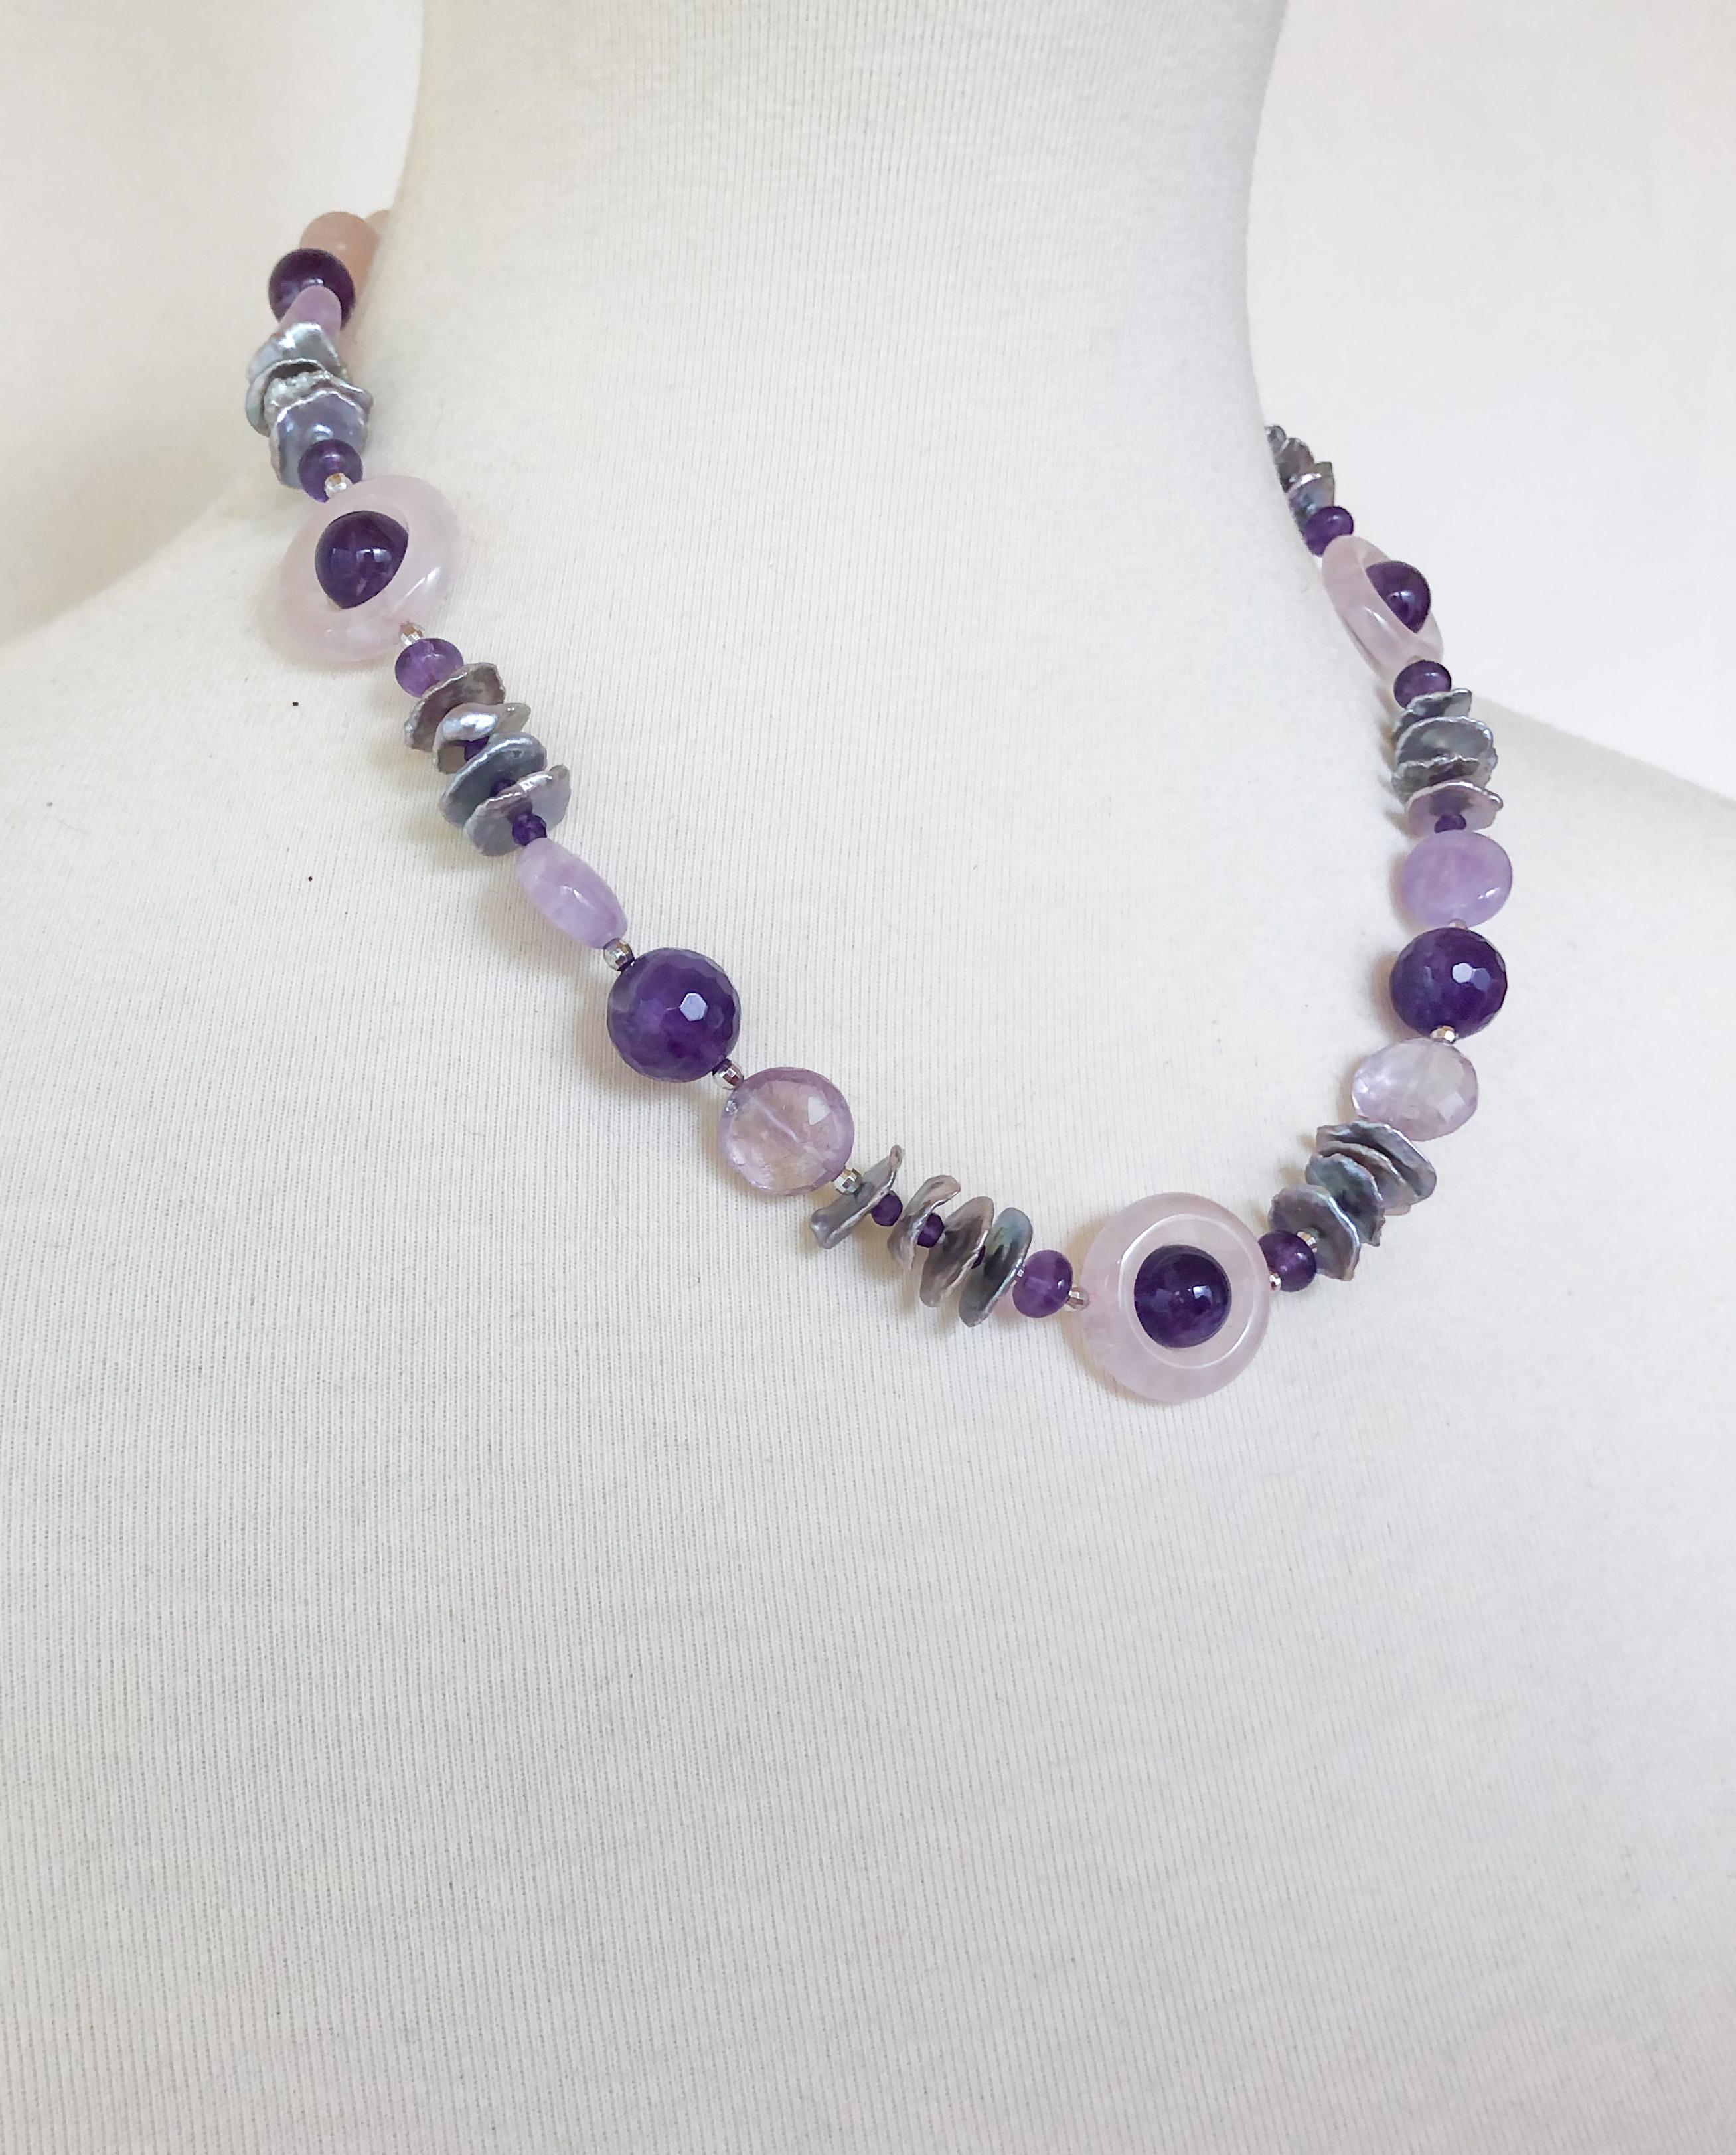 This necklace is made with various shapes and shades of amethyst, as well as rose quartz and freshwater graded grey pearls. There are also tiny amethyst and silver rhodium plated beads in between the gems for a pop of color. The necklace is 18